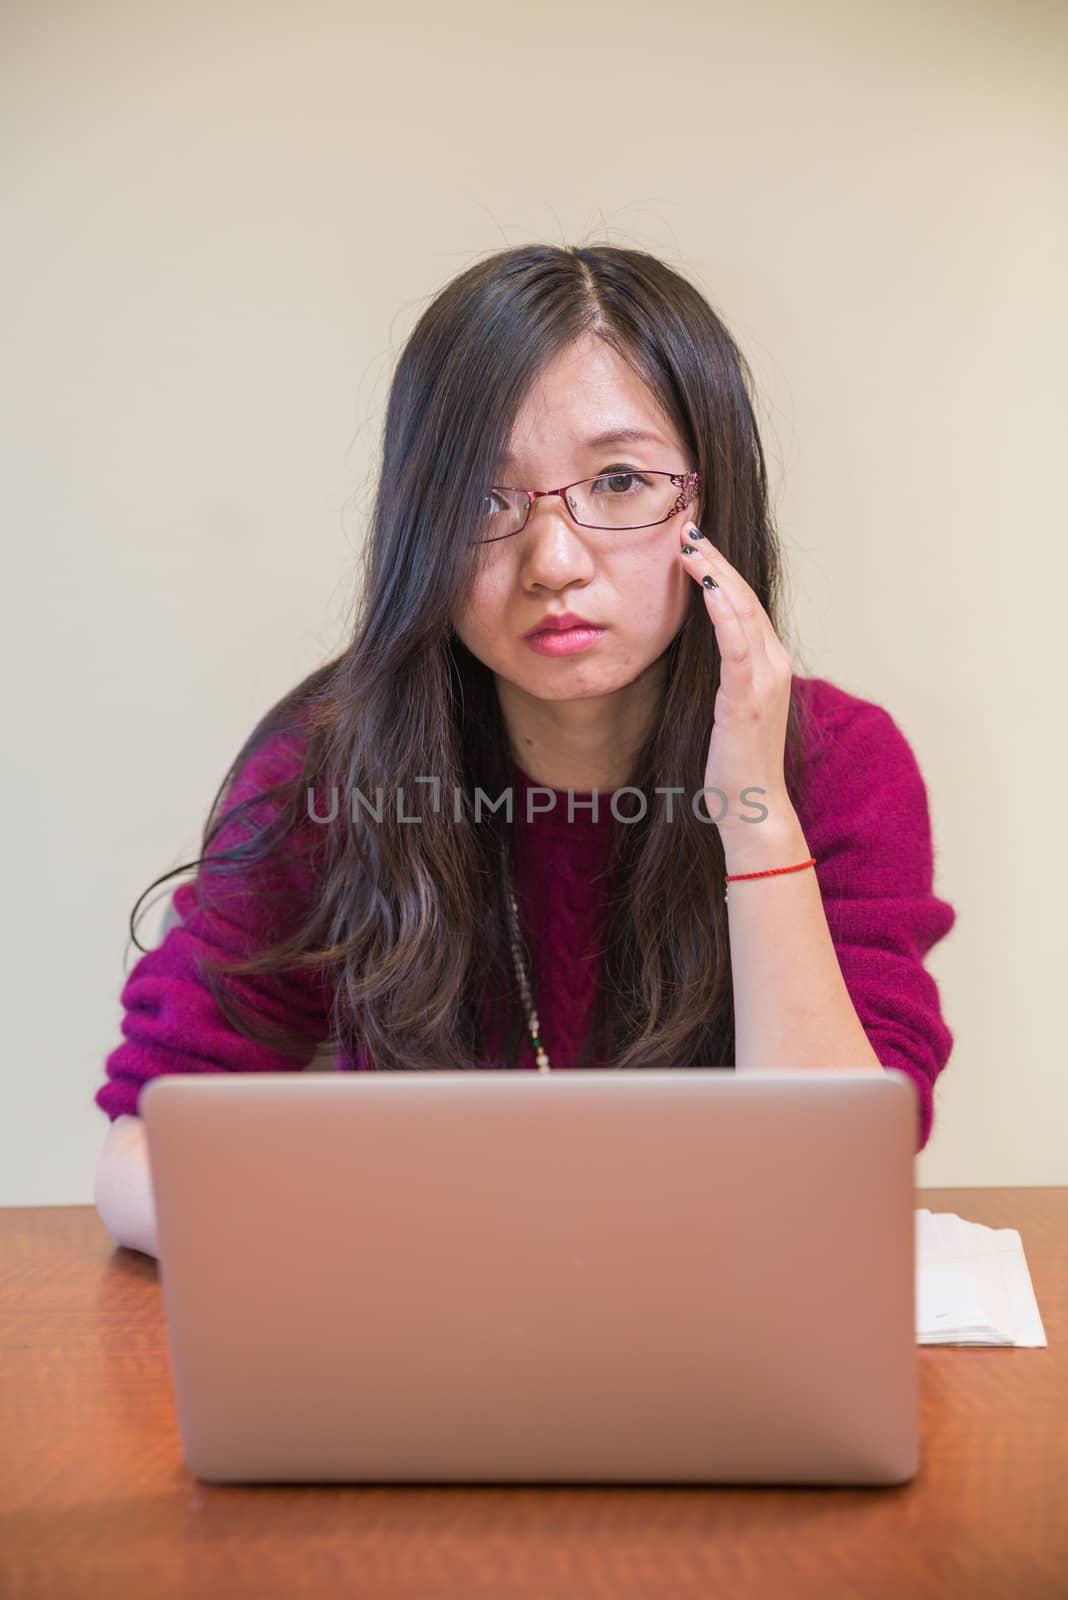 Portrait of young woman with glasses, book and laptop